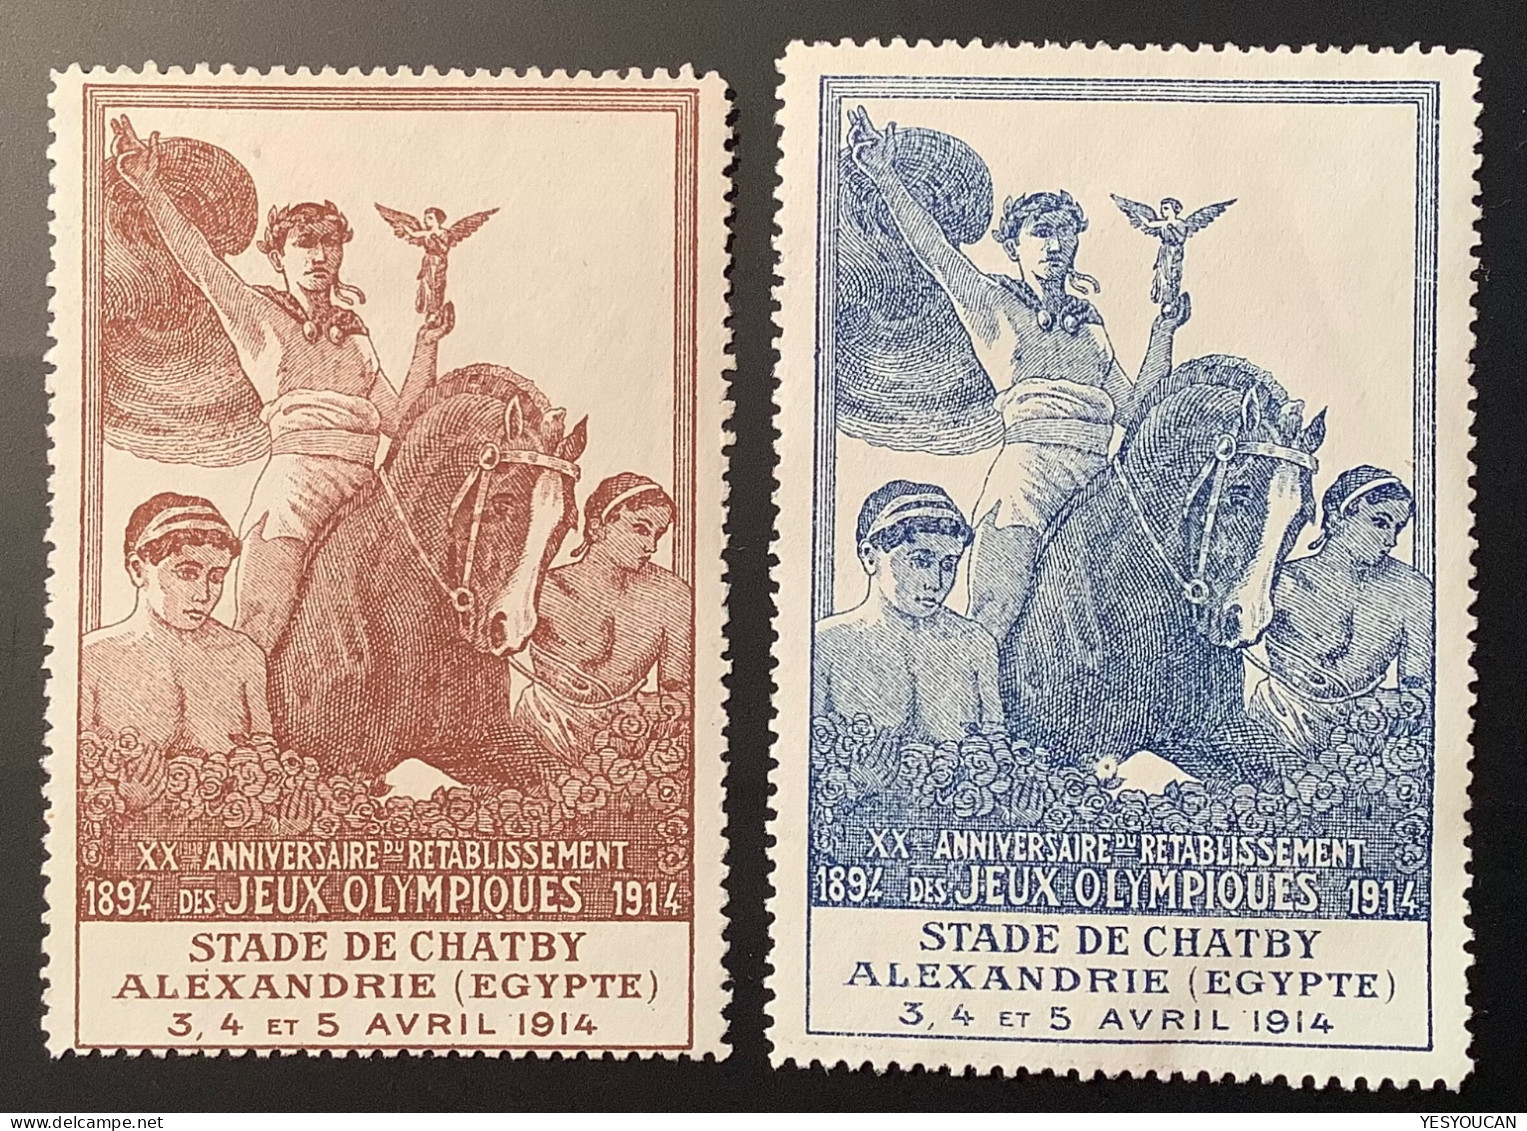 Egypt: Rare„Jeux Olympiques 1894-1914 Stade De Chatby Alexandrie“ (poster Stamps Advertising Vignettes Olympic Games - 1866-1914 Ägypten Khediva